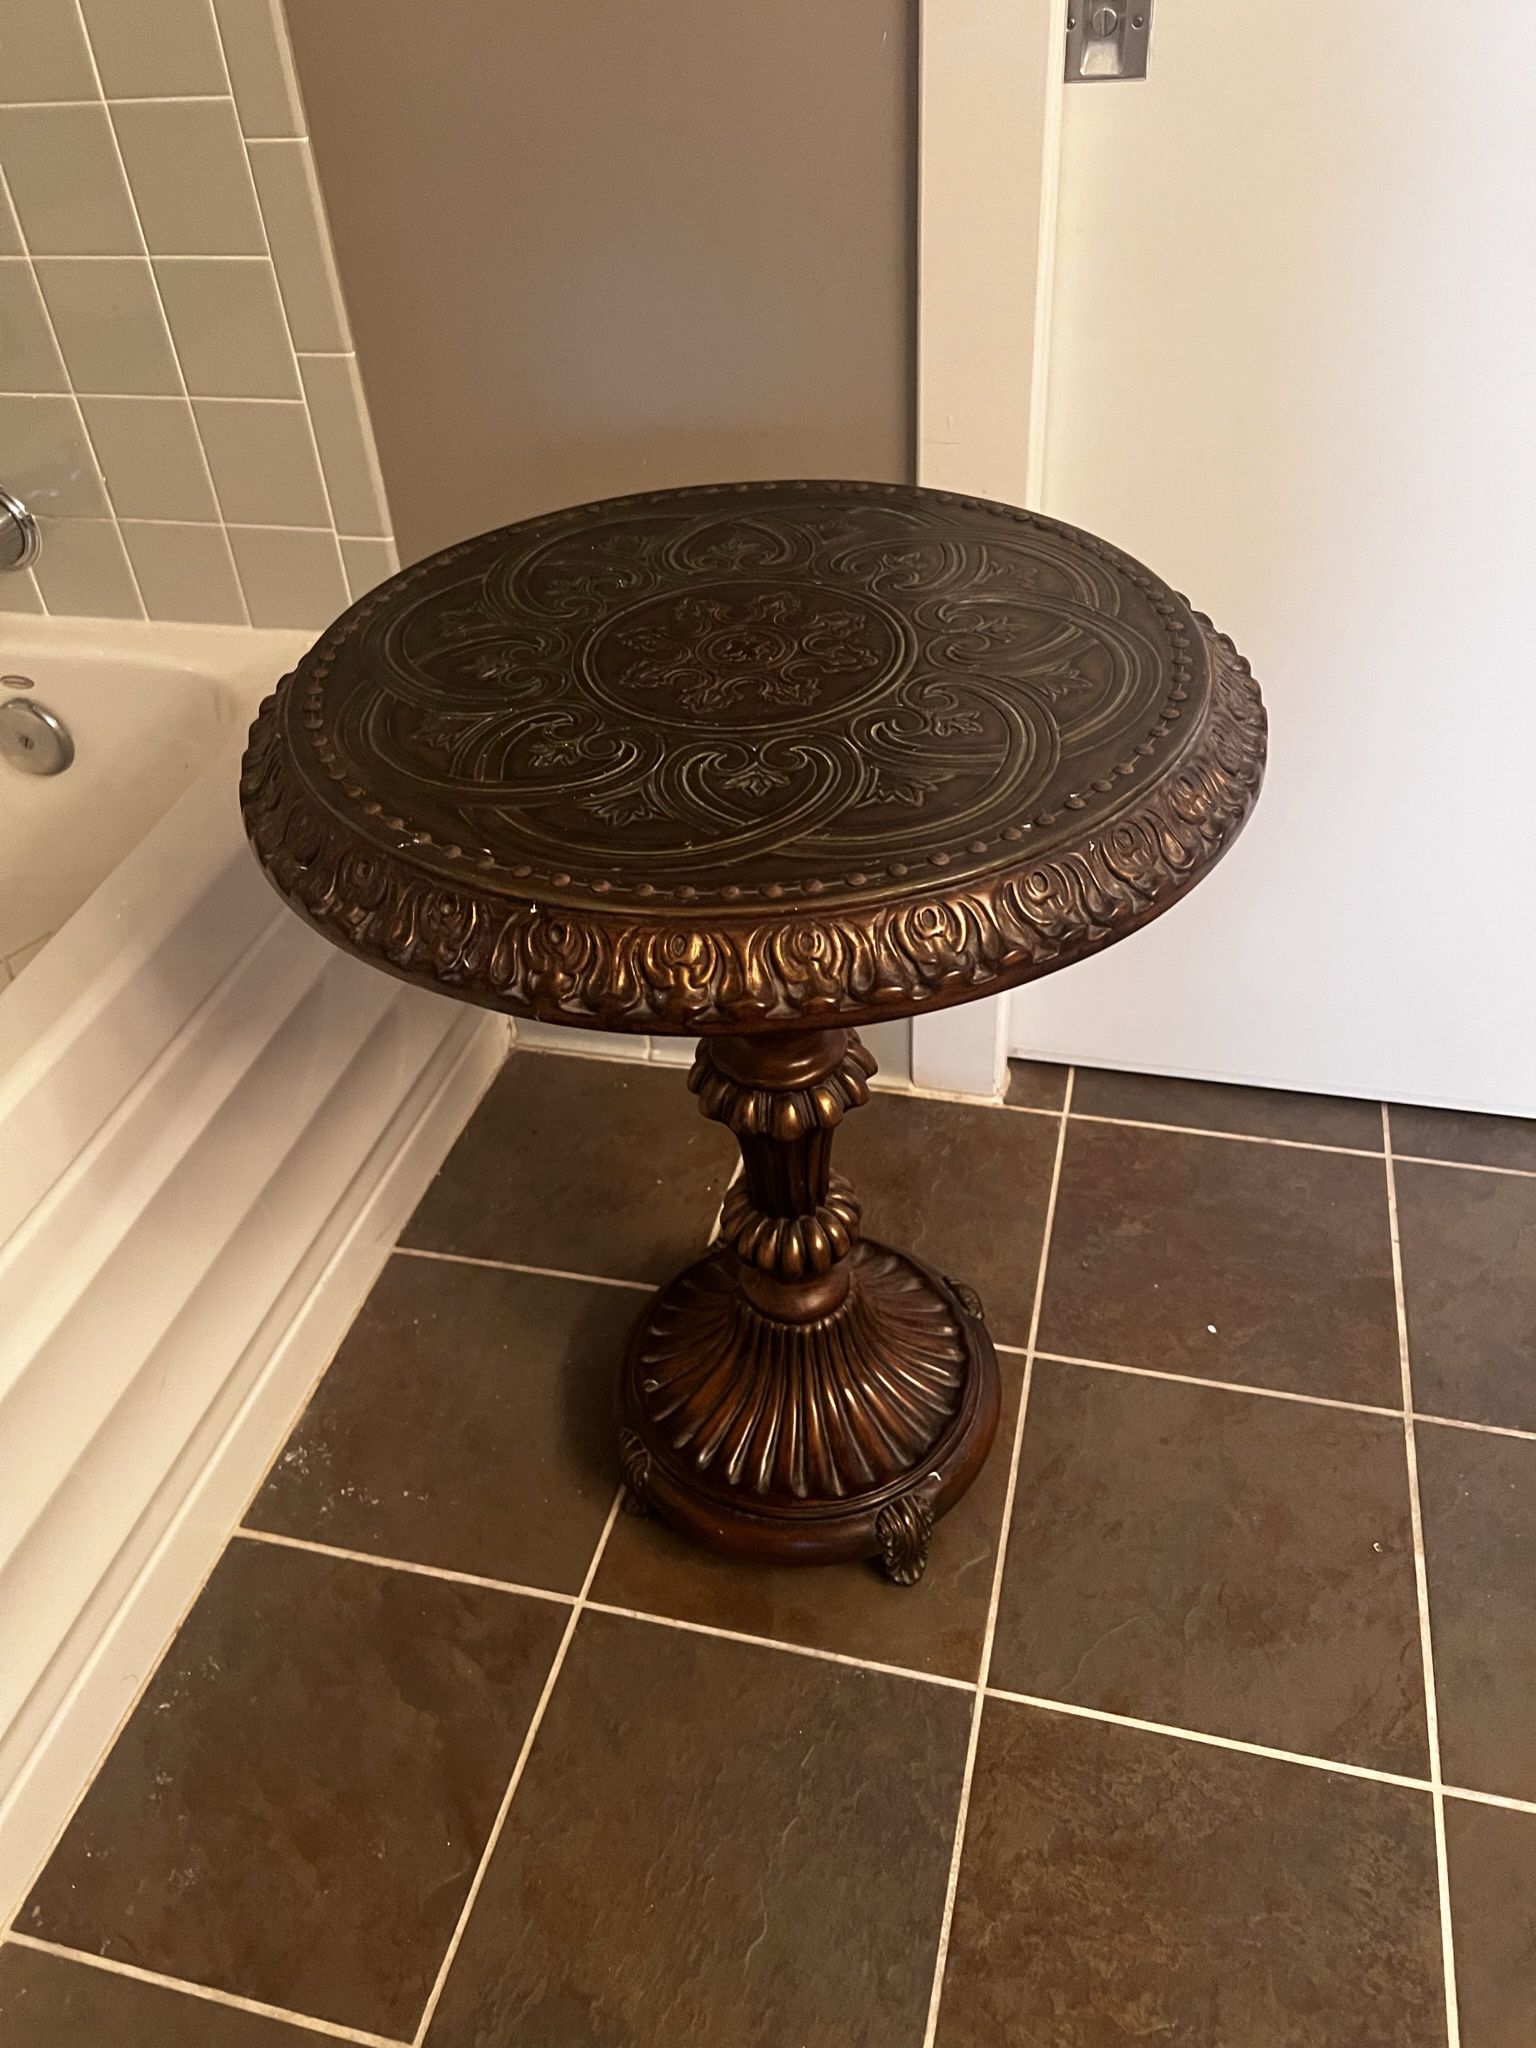 Beautiful End Table Or Display Table For An Entrance Way .